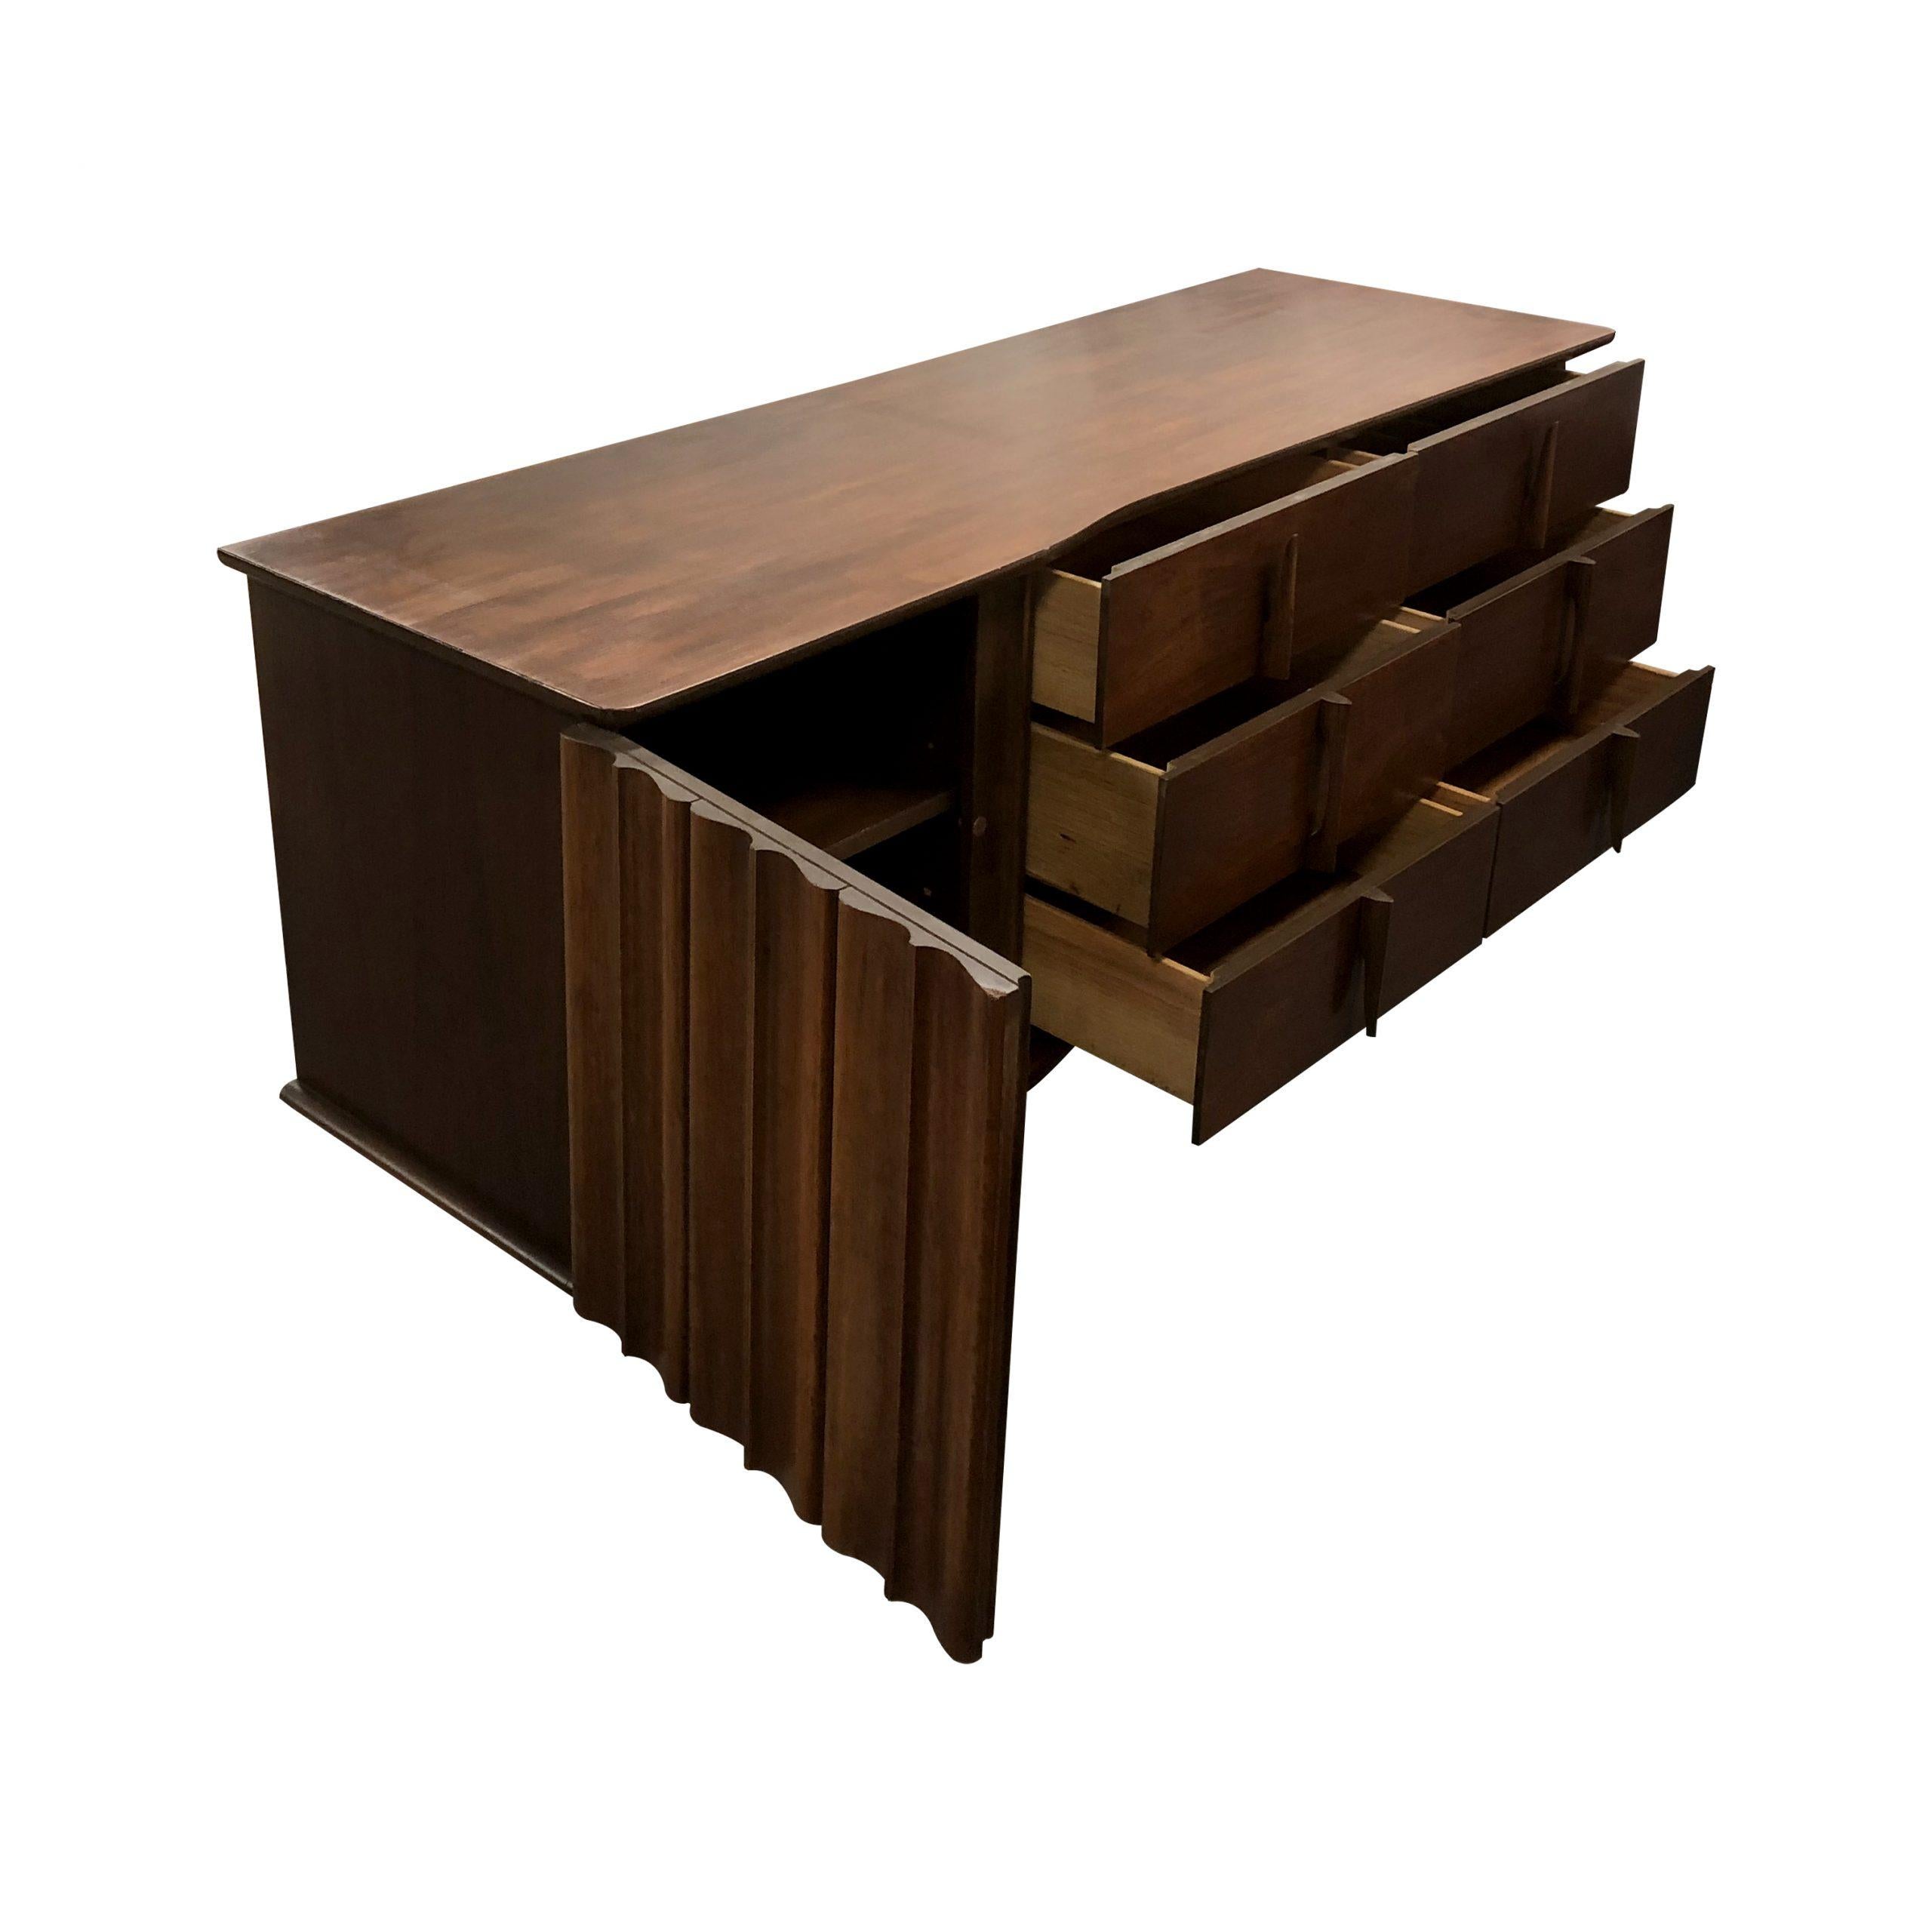 An American 1960s Brutalist sculptural walnut credenza or sideboard. This elegant sideboard has a curved carved door on the left hand side which is split into three vertical sections which contrasts with the straight lines of the six drawers on the